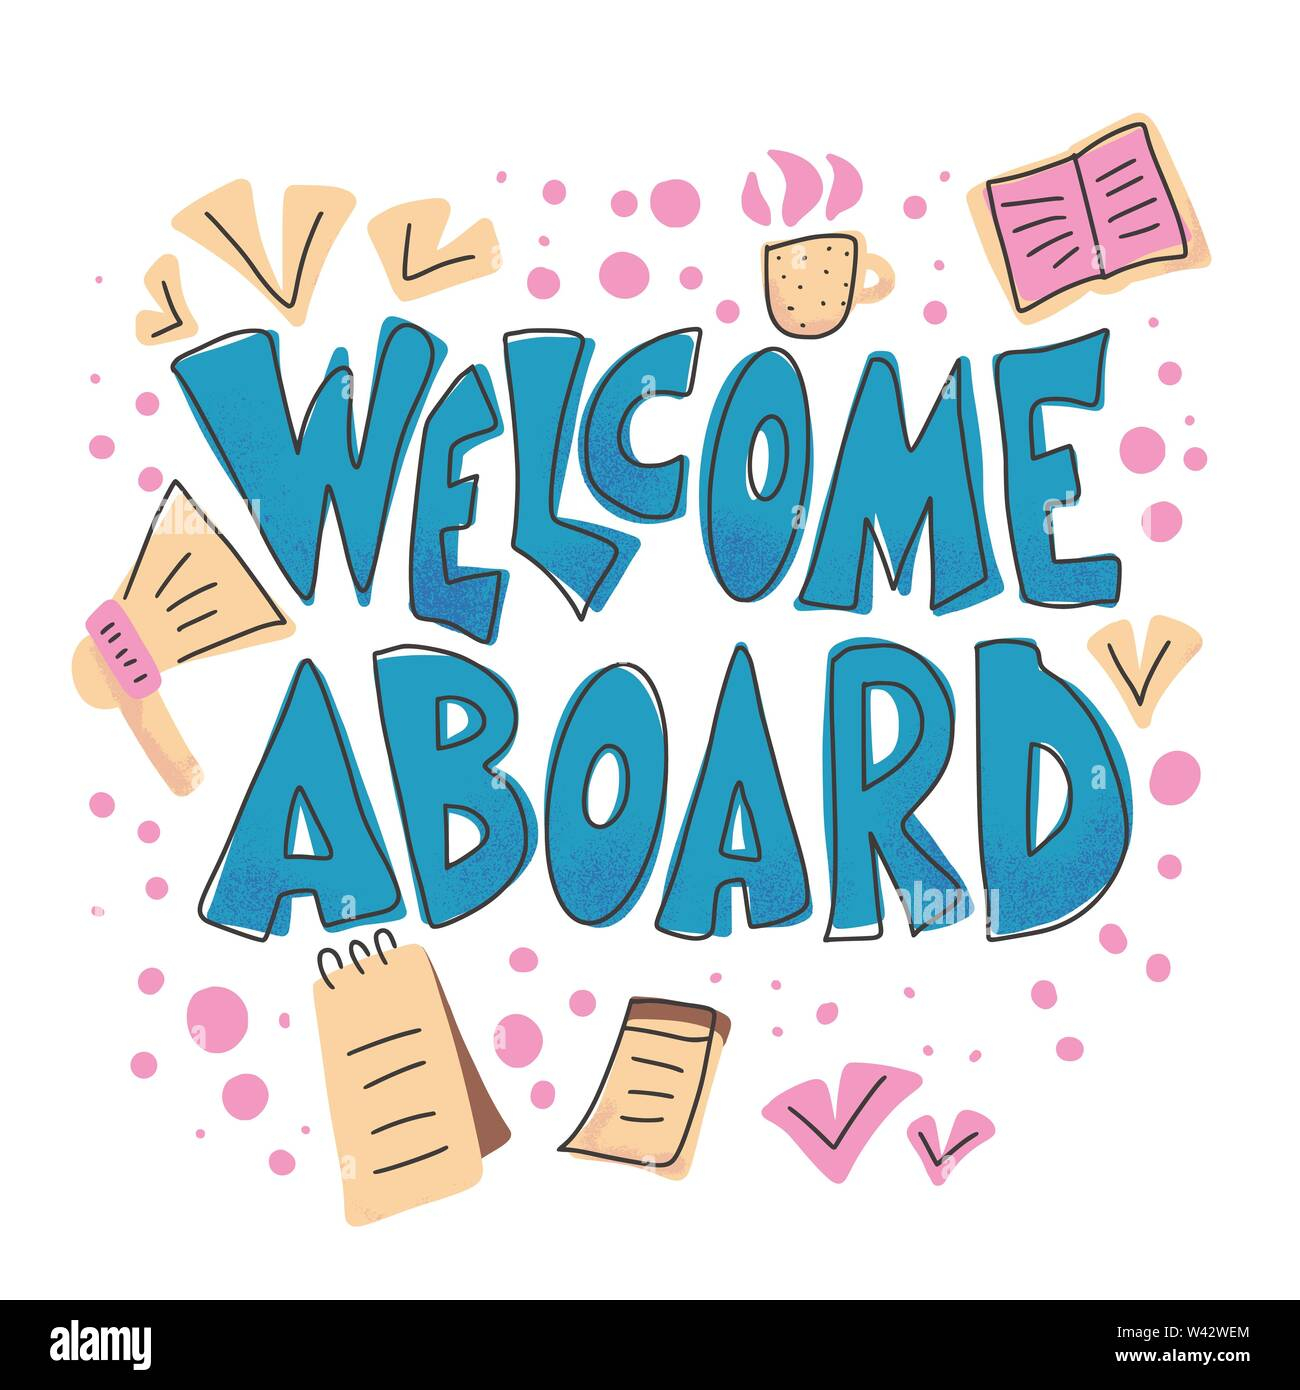 Welcome aboard banner template. Hand drawn lettering with office